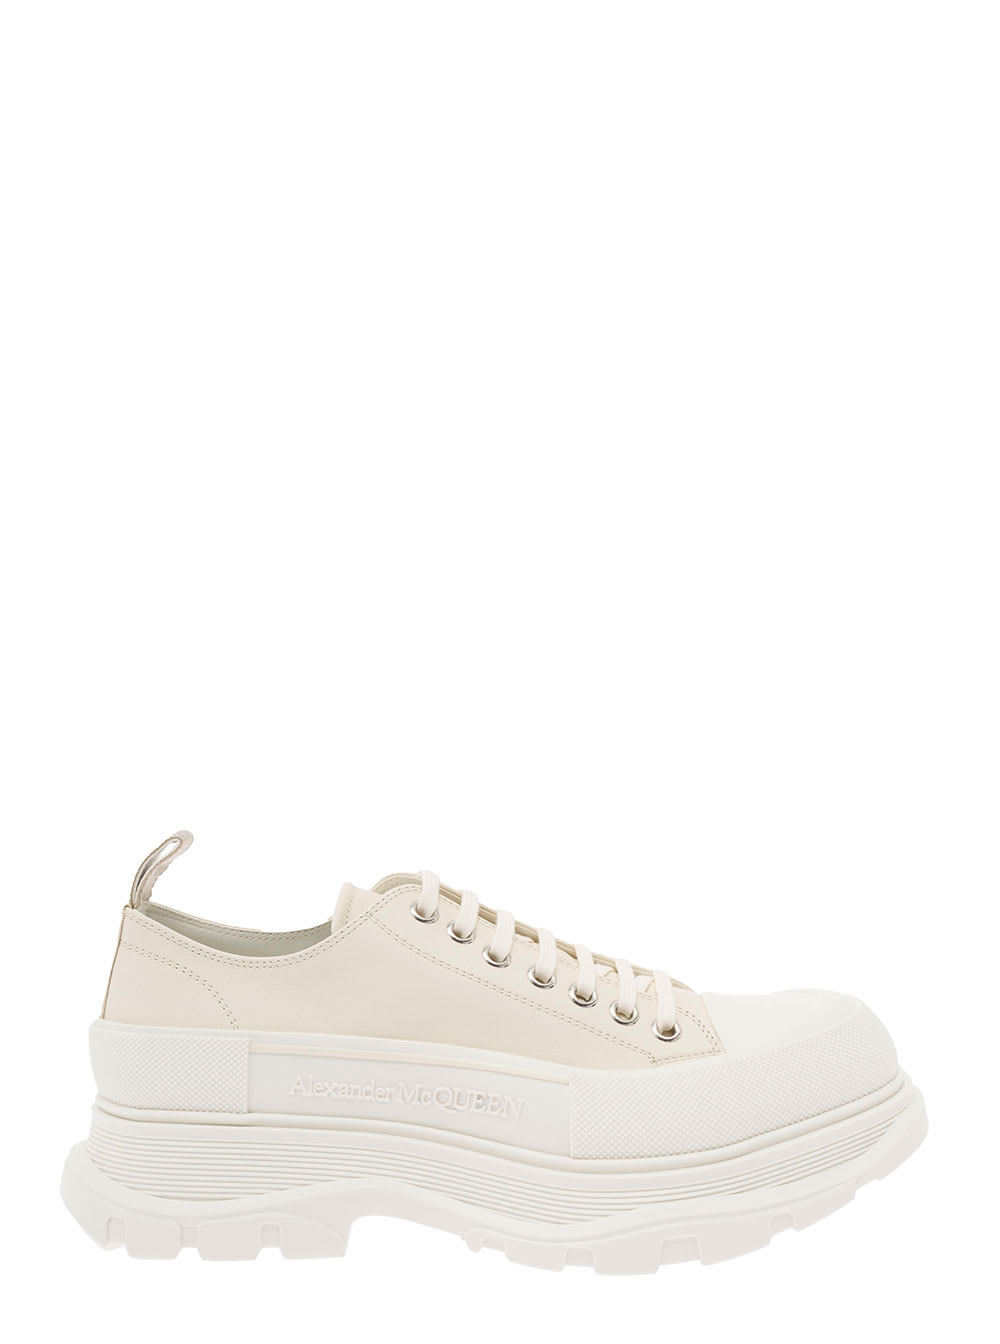 Shop Alexander Mcqueen White And Beige Tread Slick Sneakers In Calf Leather